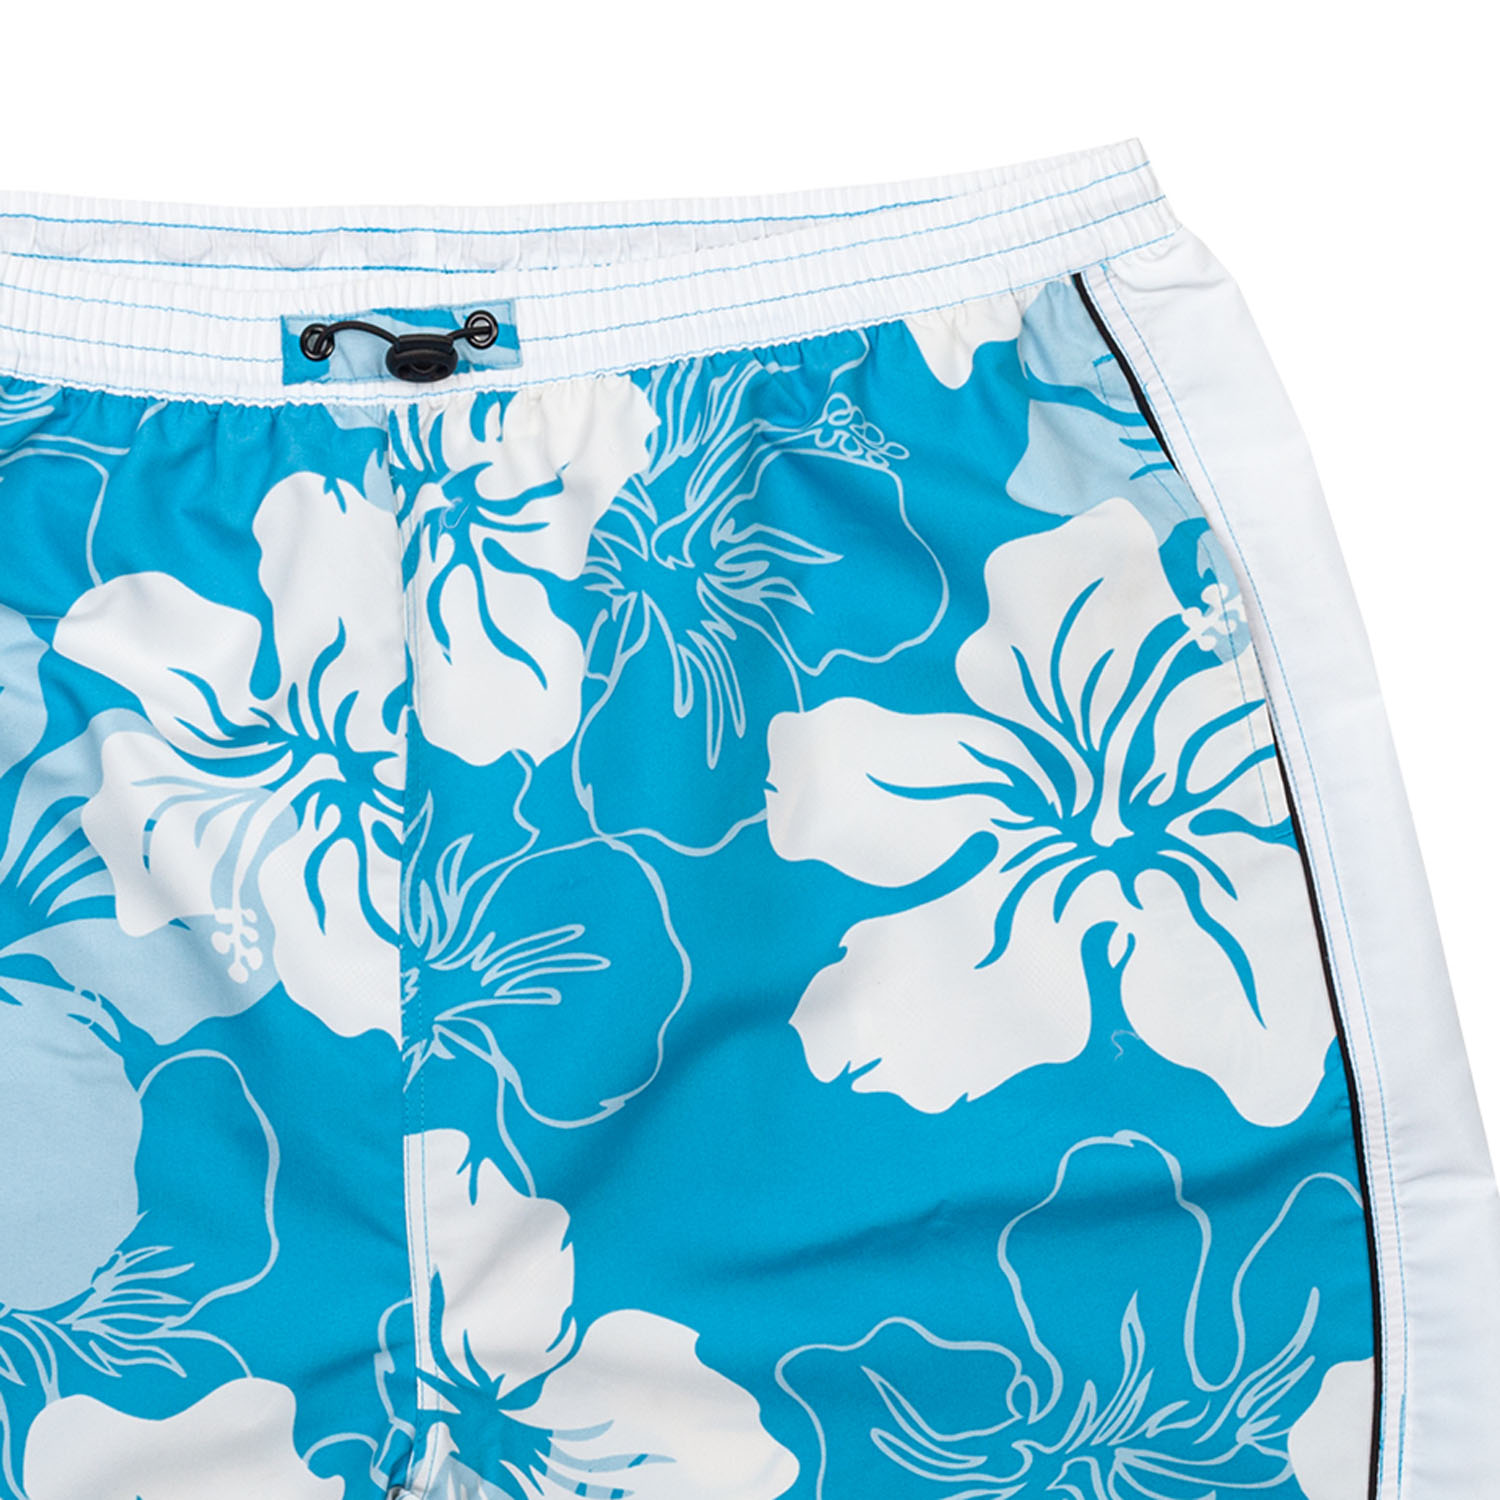 Swim bermudas by eleMar for men light blue-white patterned in oversizes up to 10XL